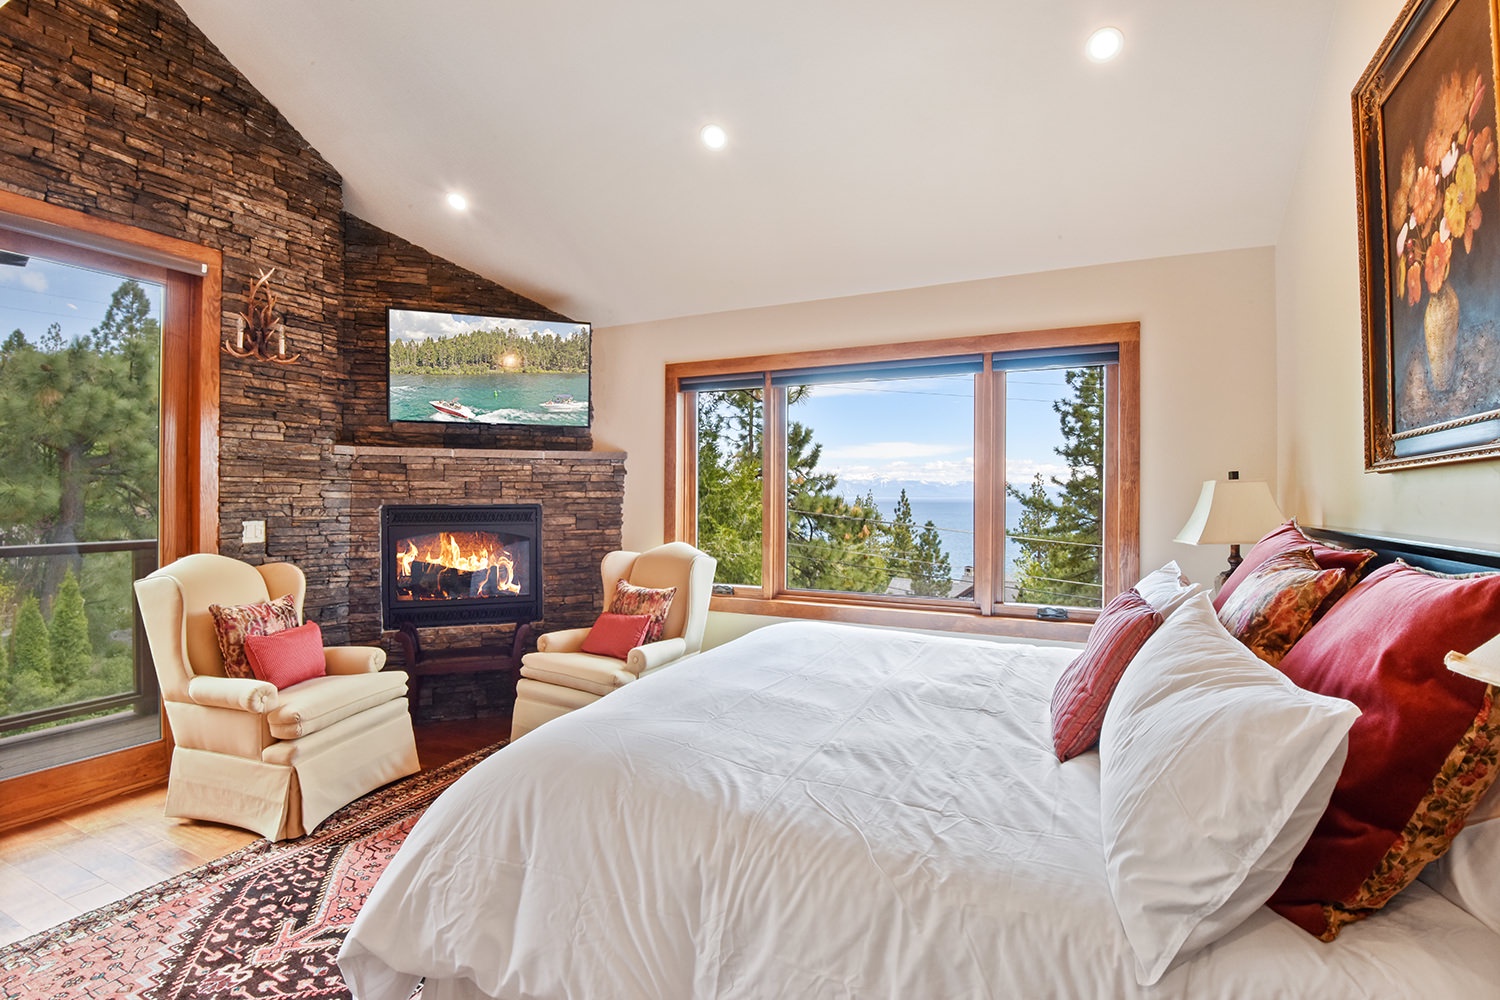 3rd floor master bedroom: King bed with lake view, Smart TV, private balcony and gas fireplace